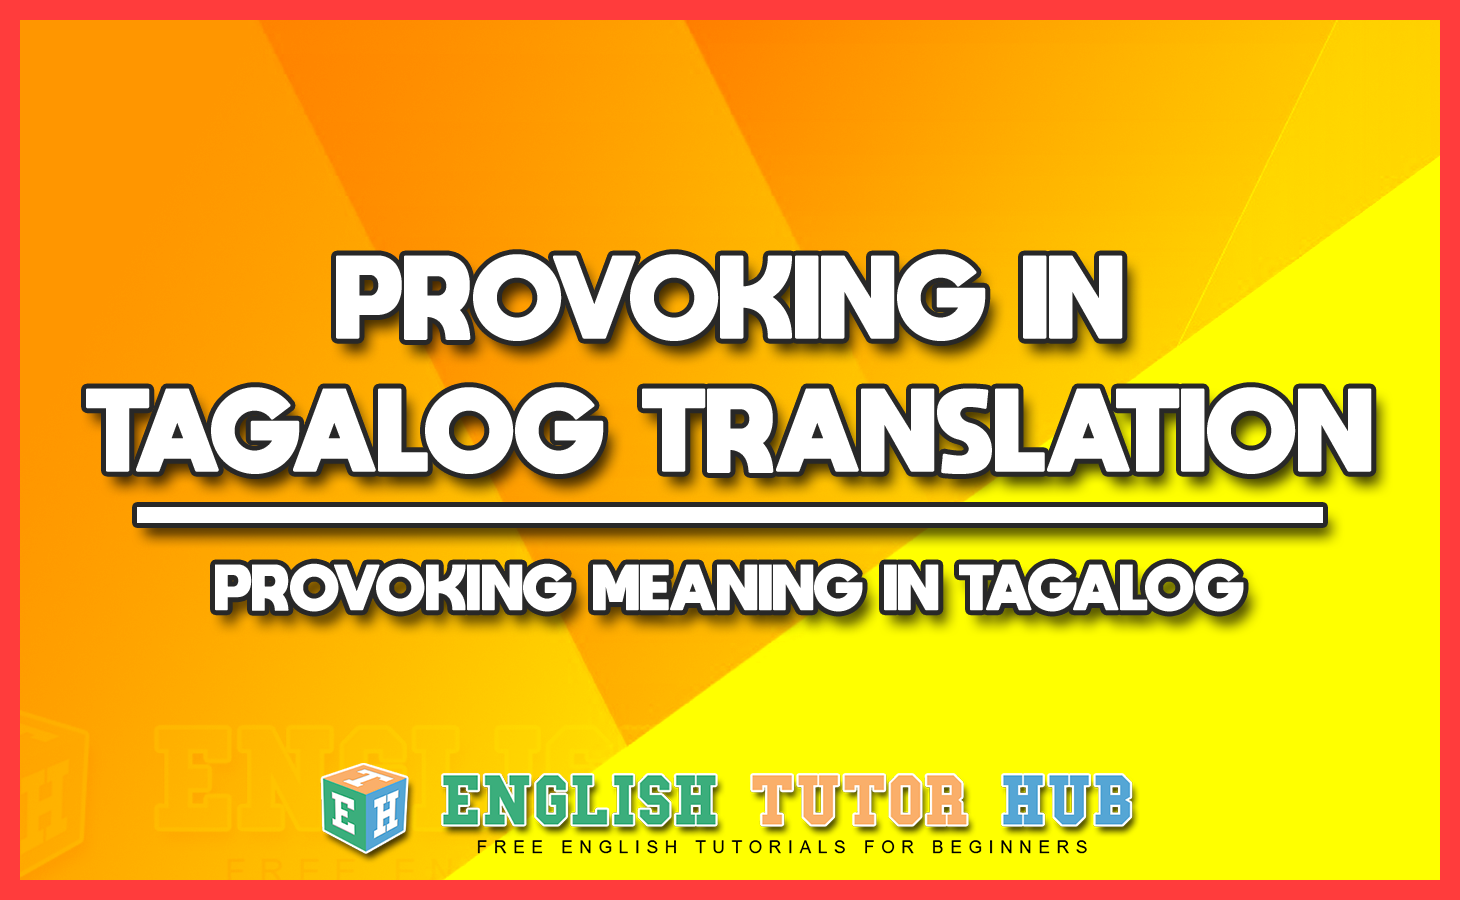 PROVOKING IN TAGALOG TRANSLATION - PROVOKING MEANING IN TAGALOG